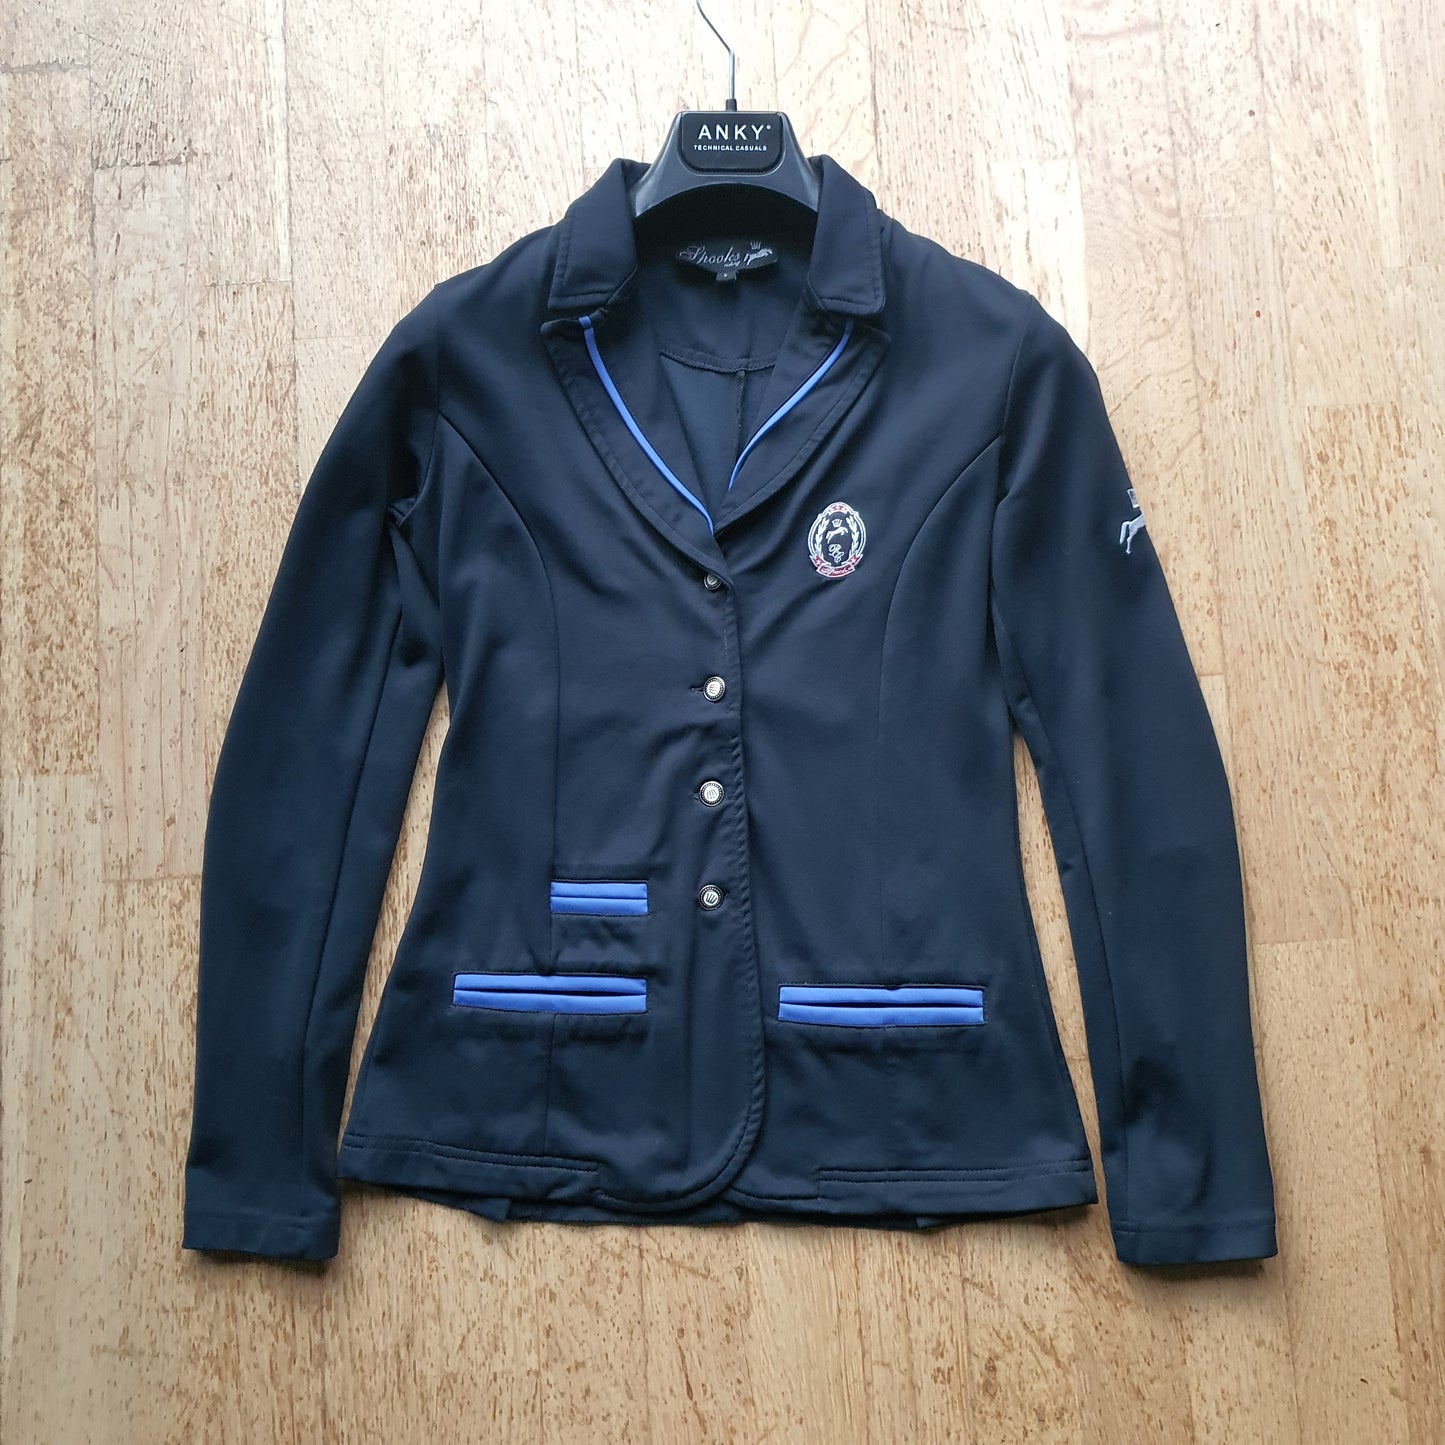 Spooks navy show jacket with blue detail ladies size 8 (Size S)